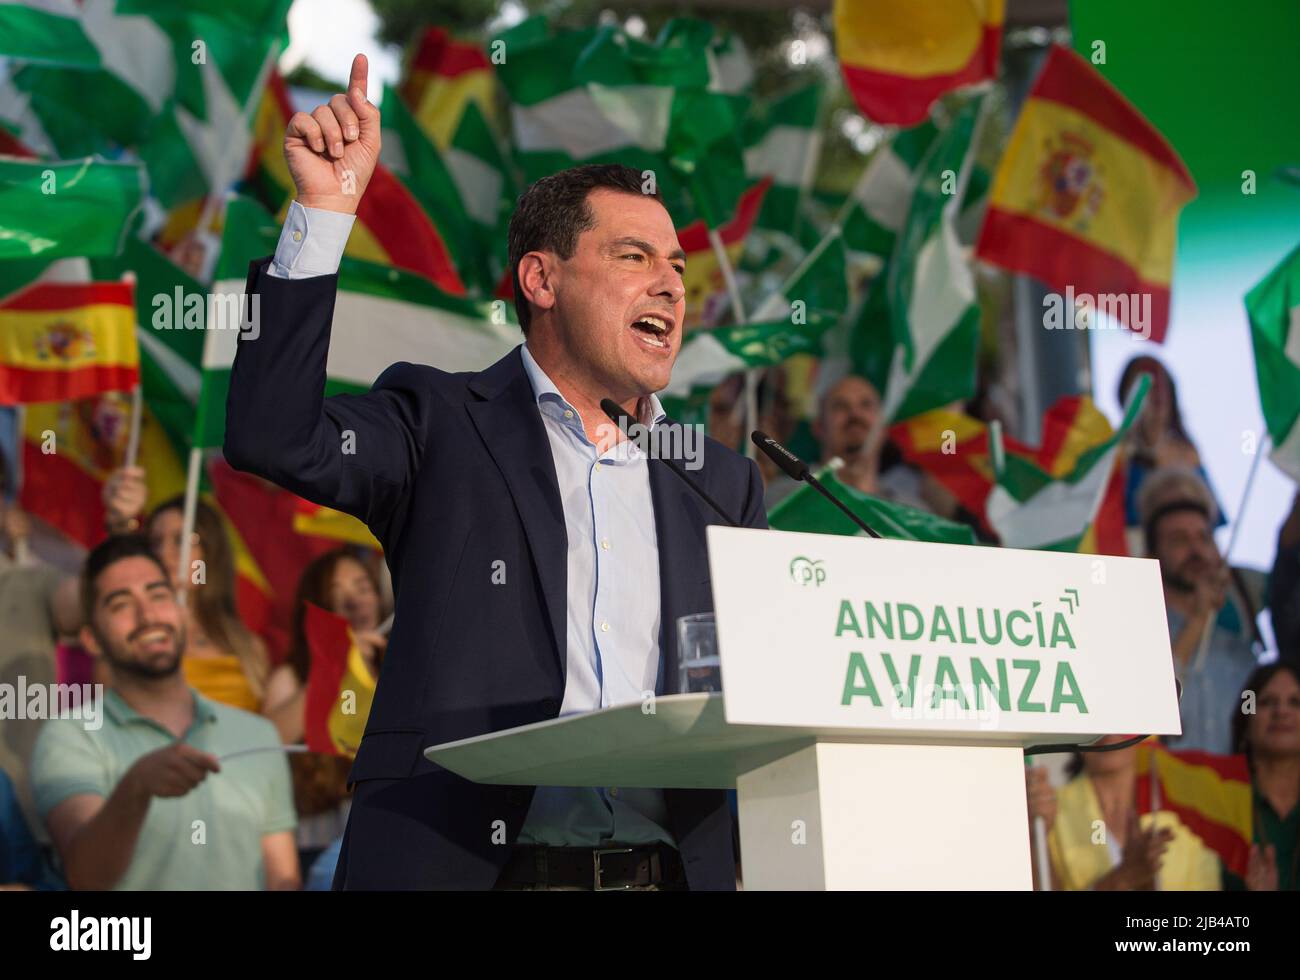 Andalusian president Juanma Moreno, and candidate for the reelection to lead the Andalusian regional government is seen delivering a speech during the start of the Andalusian electoral campaign. After announcing regional elections in Andalusia are to be held on 19th June, the main political parties have started holding events and rallies in different cities in Andalusia. Several media polls place the Andalusian Popular Party in the lead, despite the rise of the Spanish far-right party VOX. Parties on the left of the political spectrum are fragmented Stock Photo